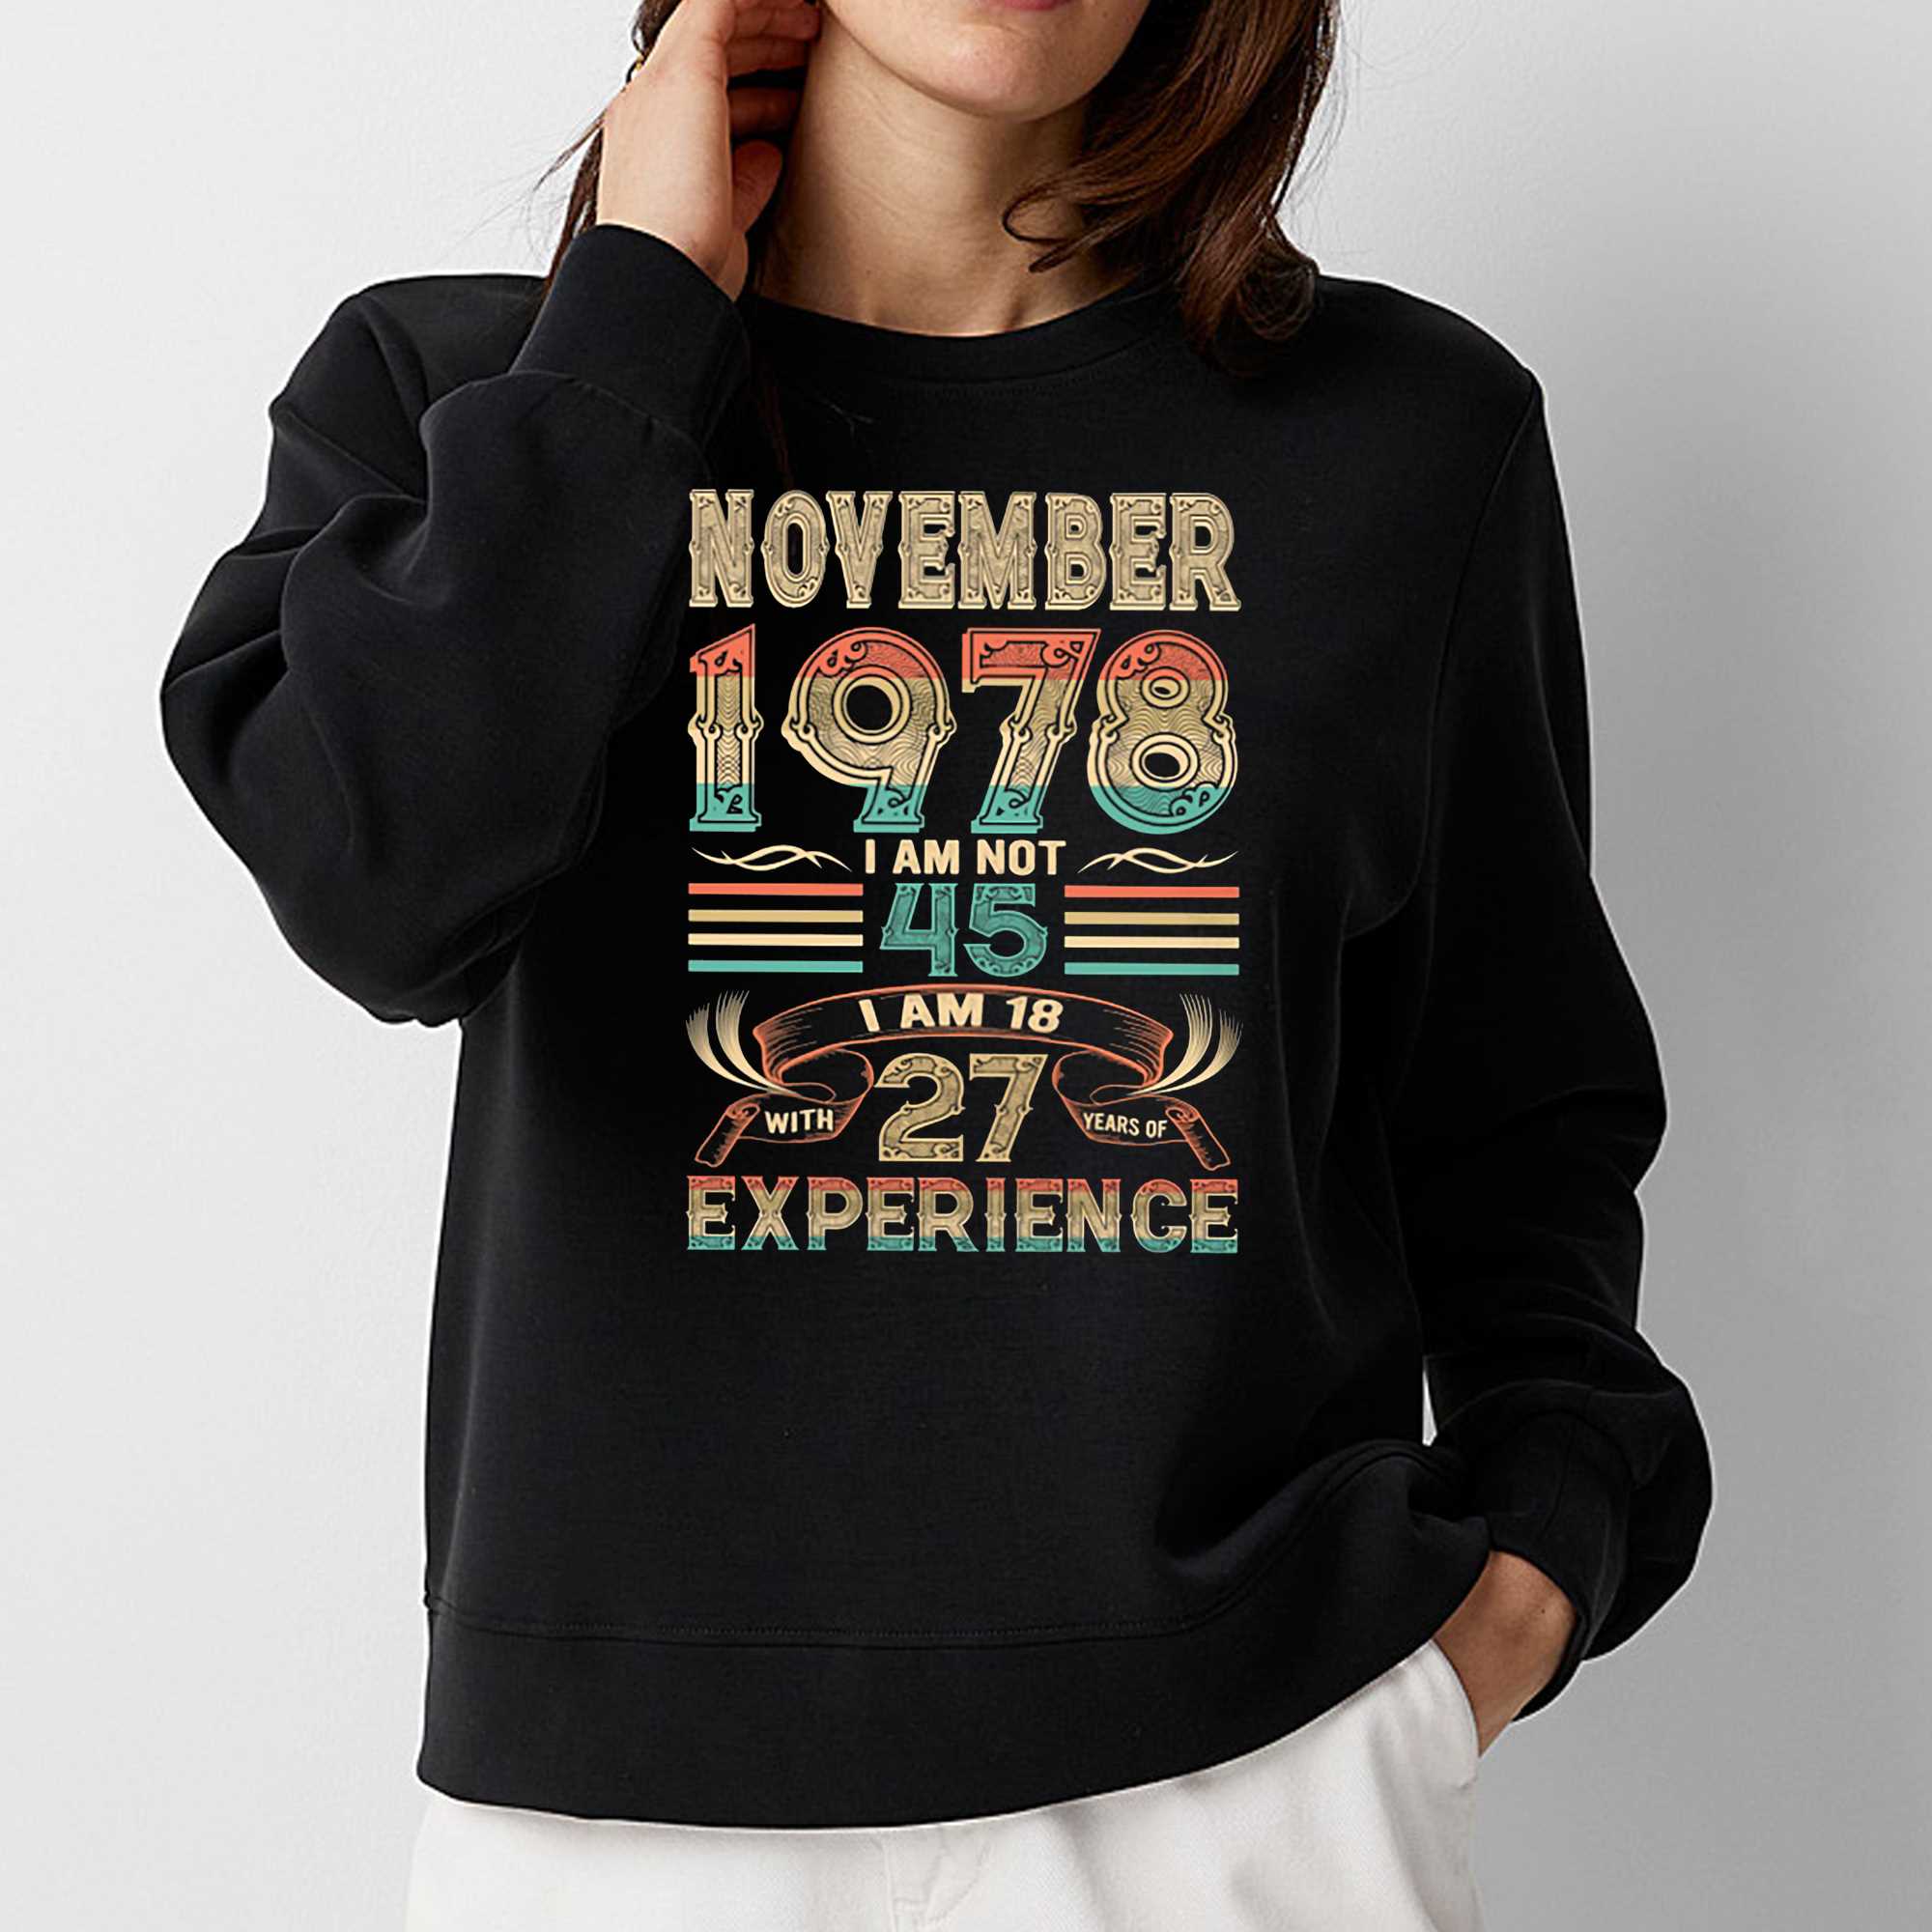 November 1978 I Am Not 45 I Am 18 With 27 Years Of Experience Shirt 